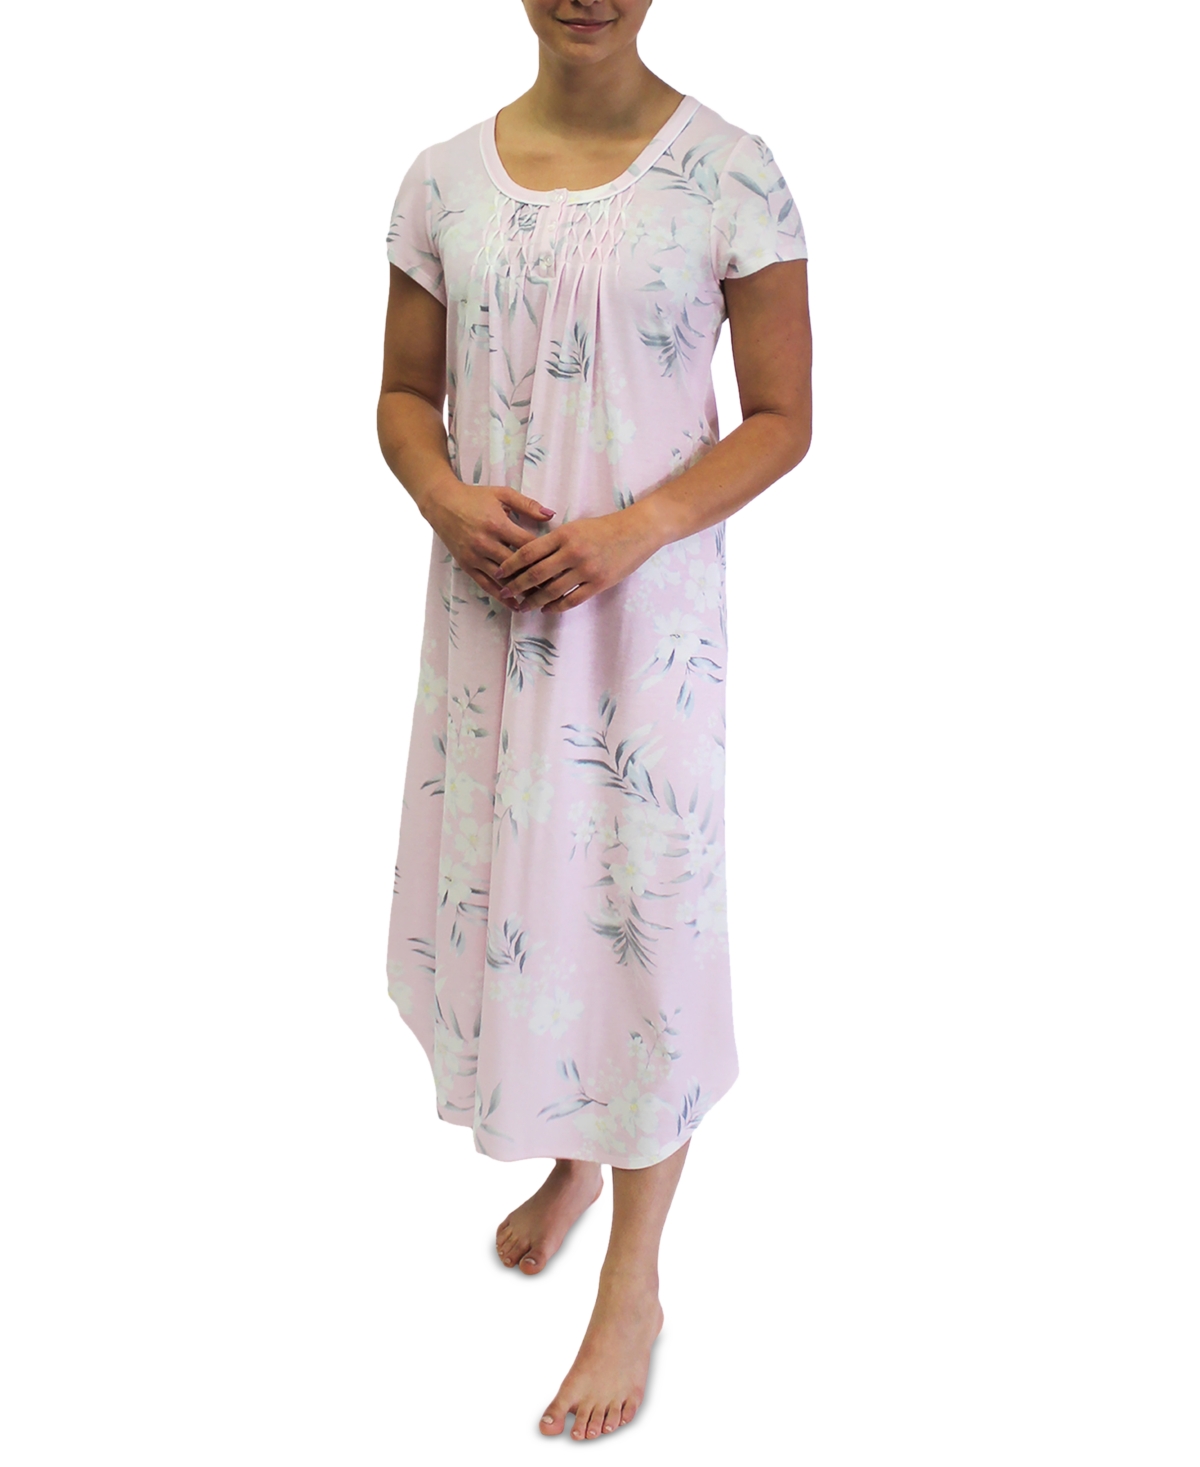 Women's Short-Sleeve Floral Nightgown - Pink Bouquets